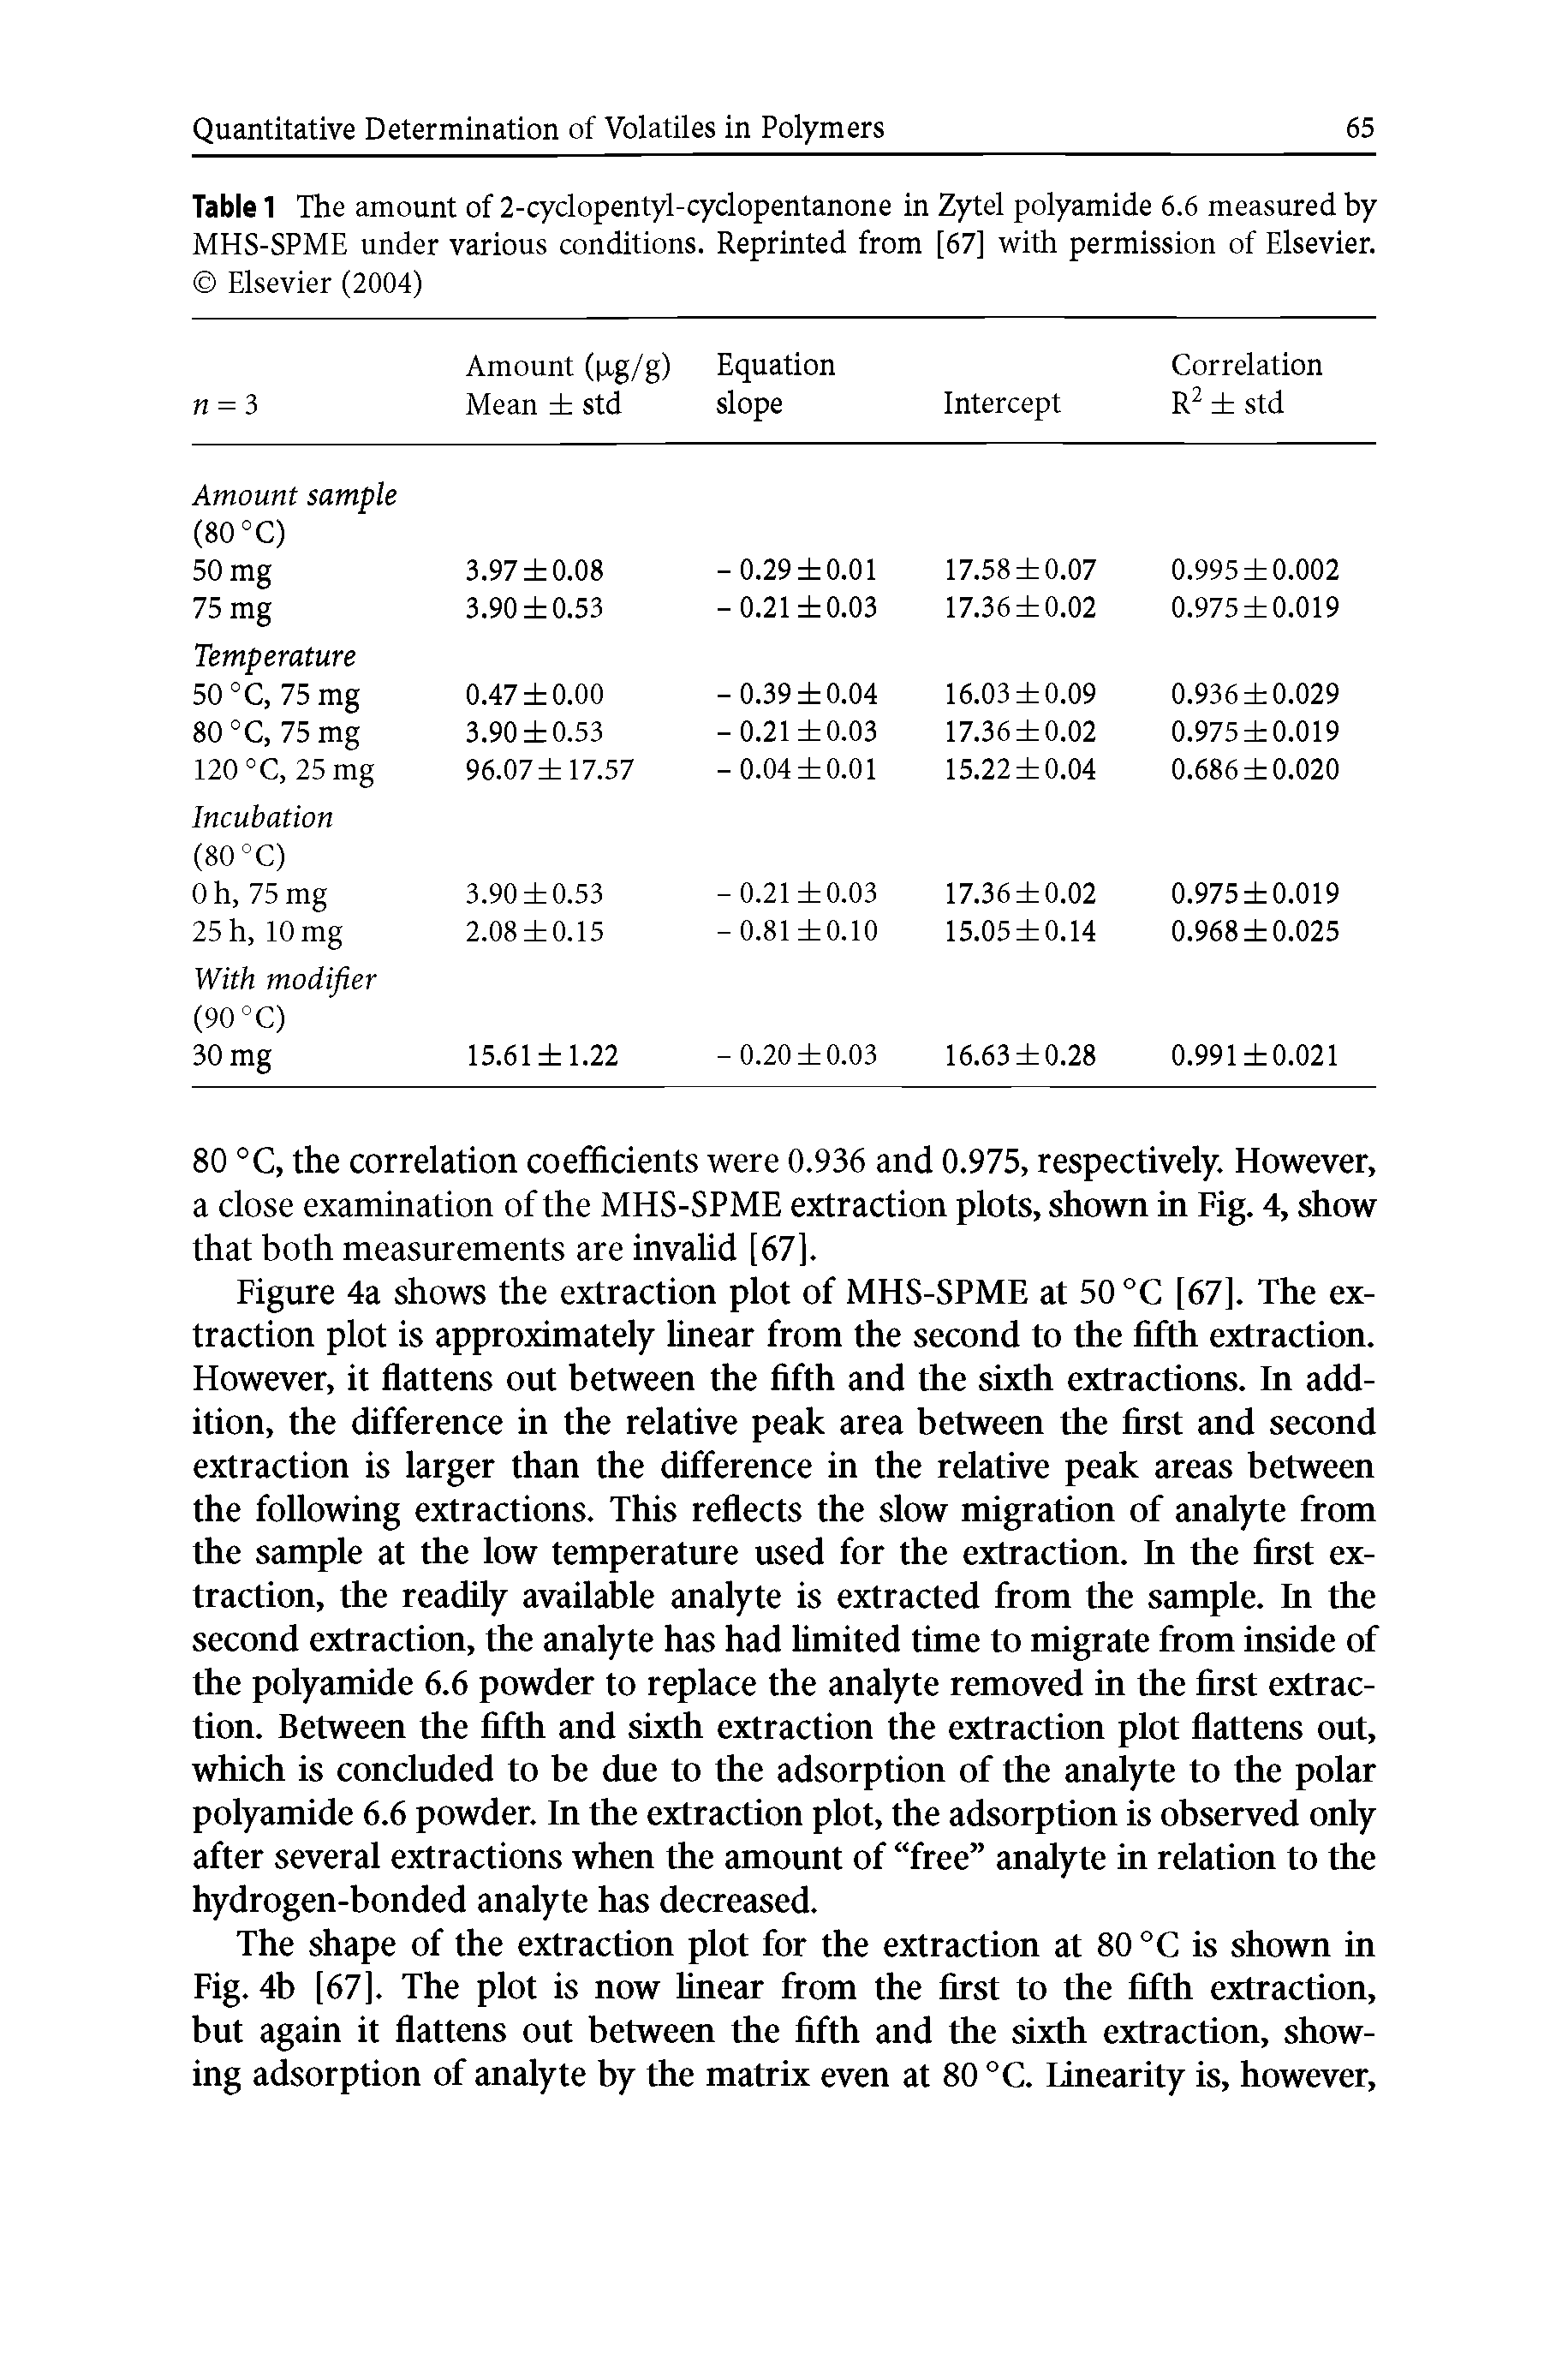 Table 1 The amount of 2-cyclopentyl-cyclopentanone in Zytel polyamide 6.6 measured by MHS-SPME under various conditions. Reprinted from [67] with permission of Elsevier. Elsevier (2004) ...